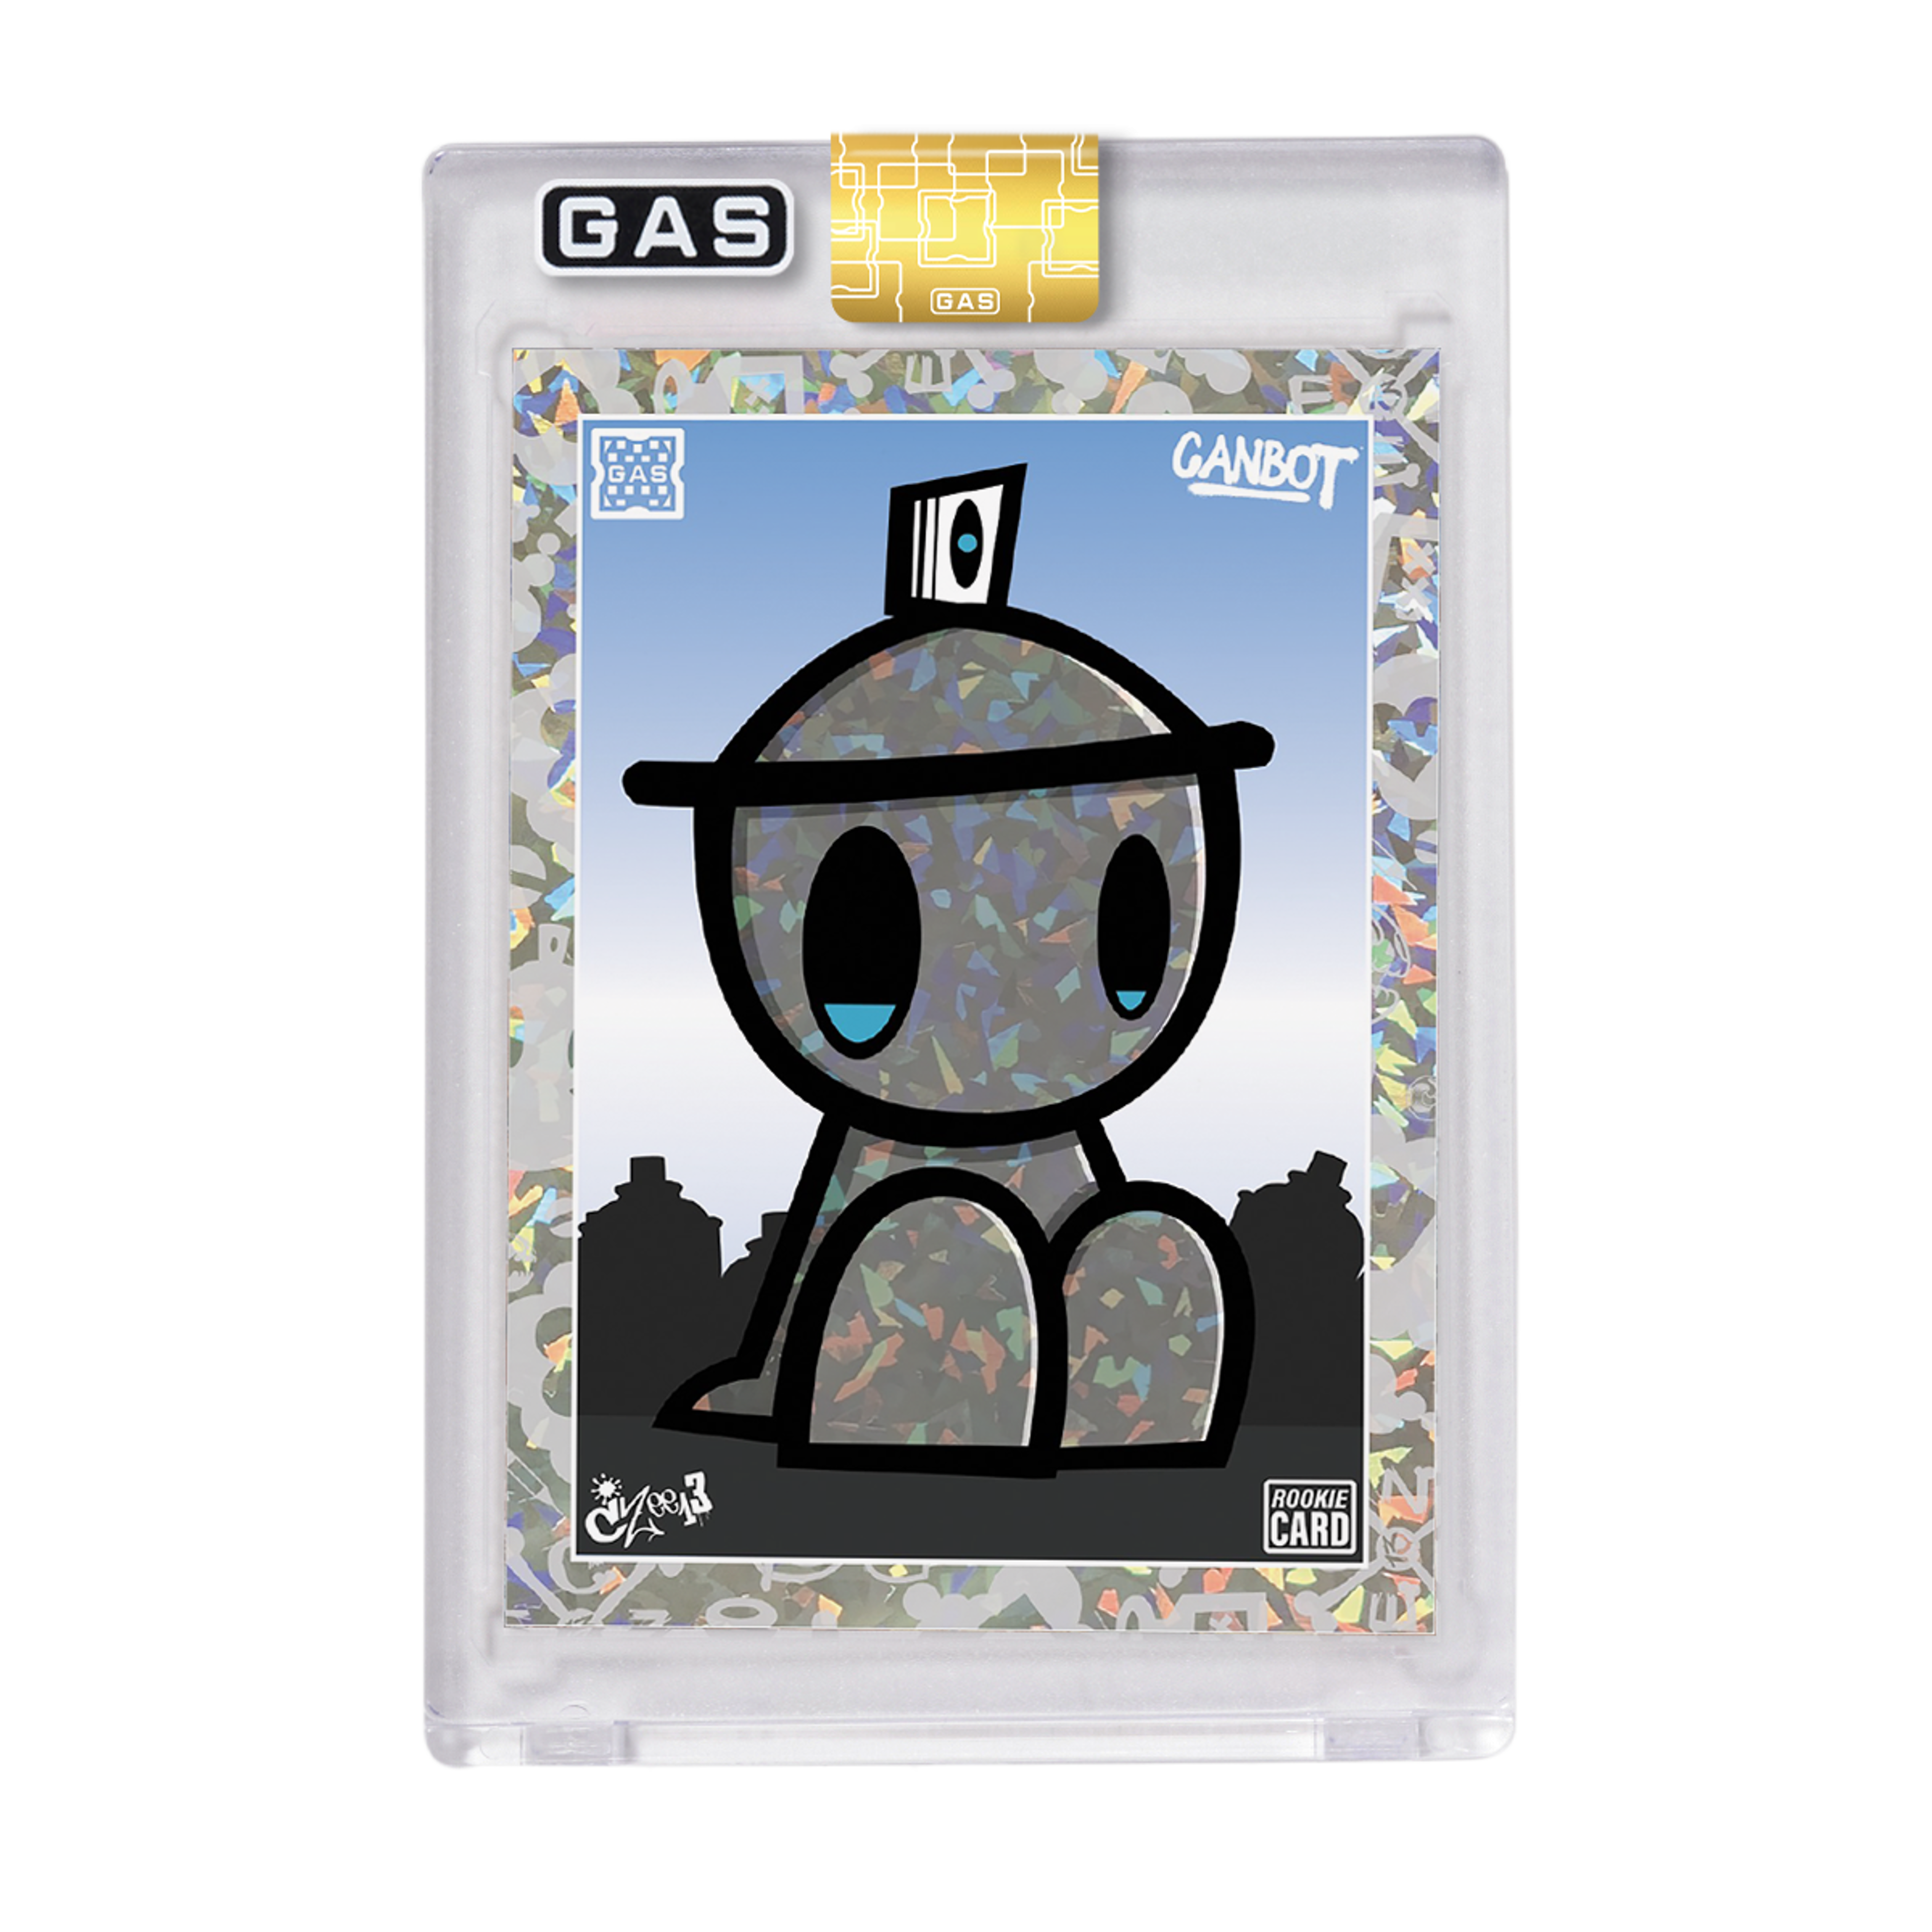 Limited Edition GAS Canbot Artist Series #1 OG Canbot by CZee13 